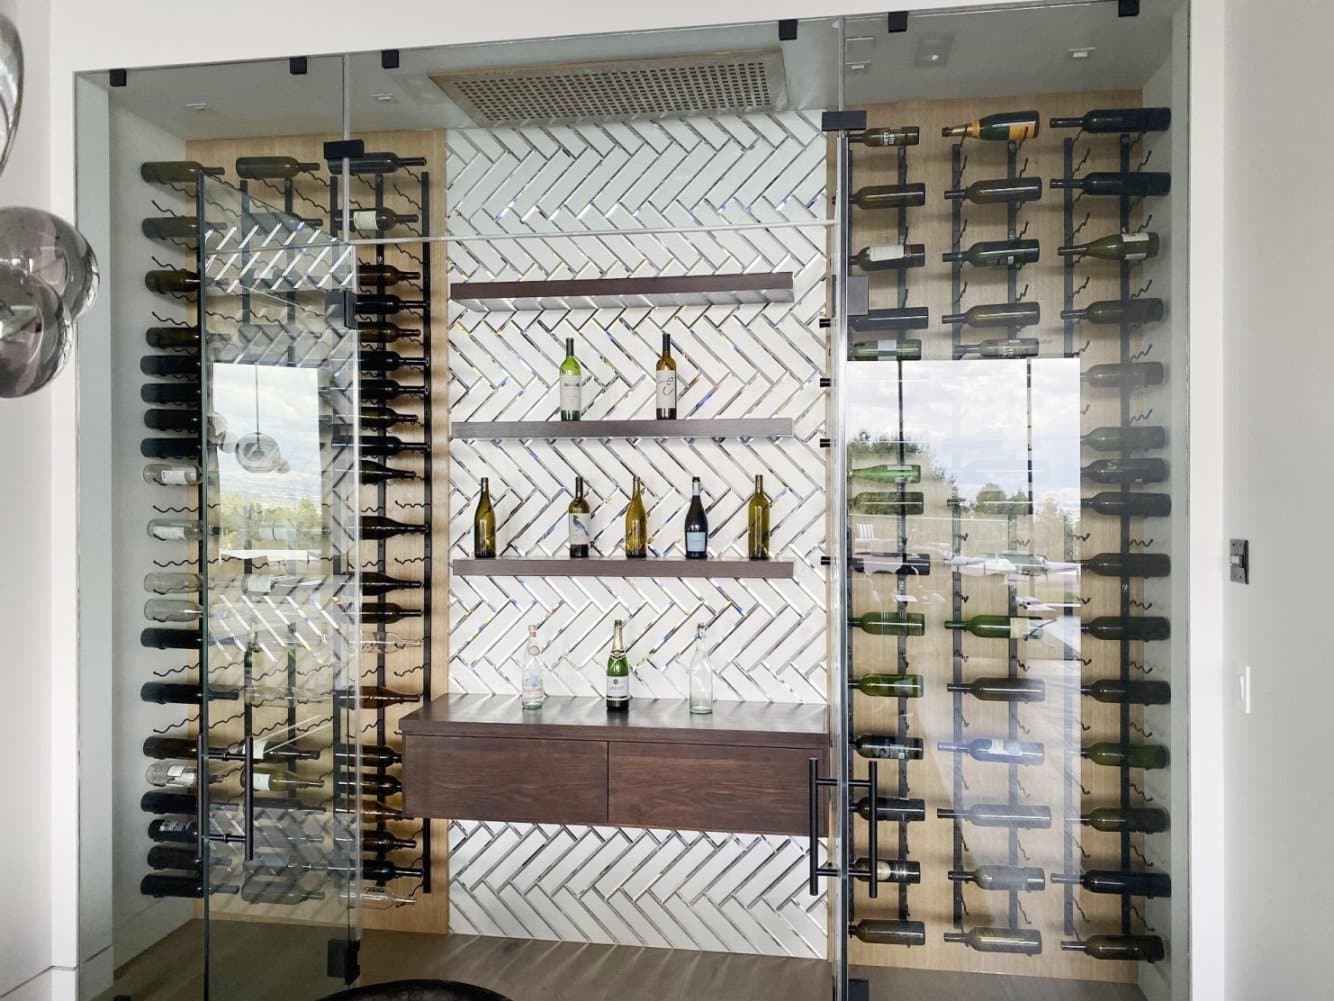 Exceptional Closet Custom Wine Cellars Project by San Diego Experts 